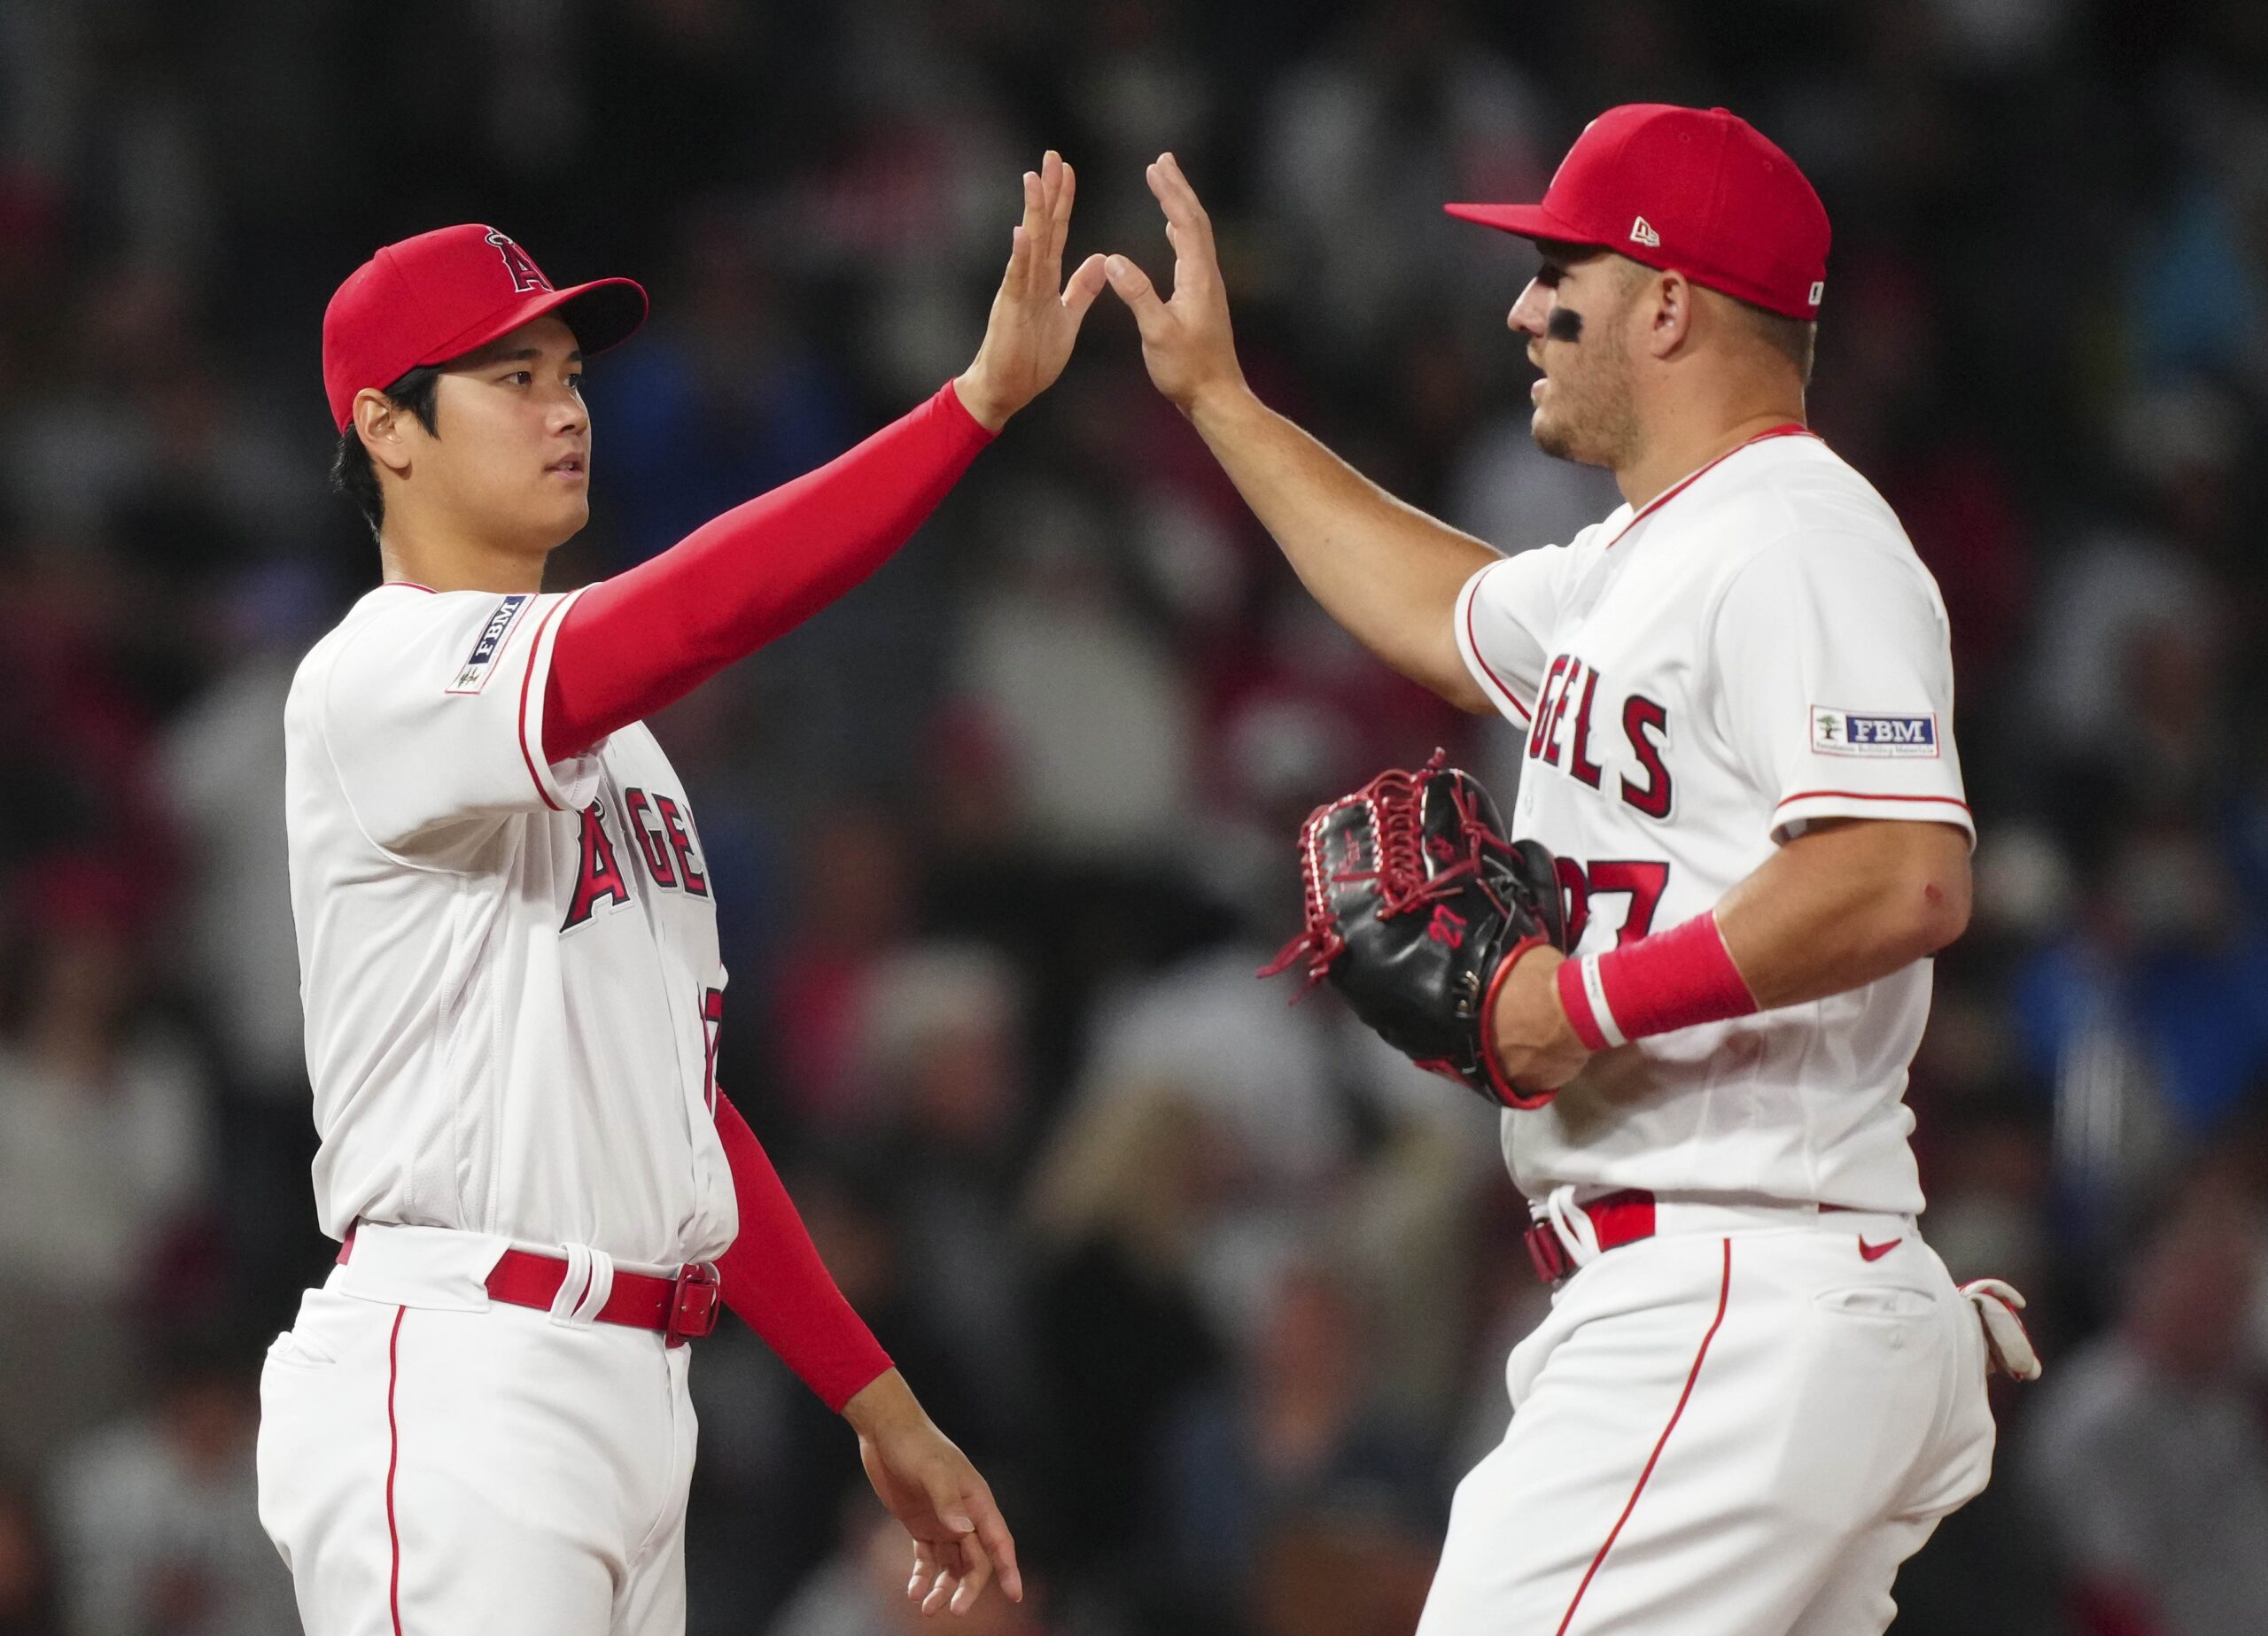 Angels News: Mike Trout & Shohei Ohtani Break Out In Win Over White Sox